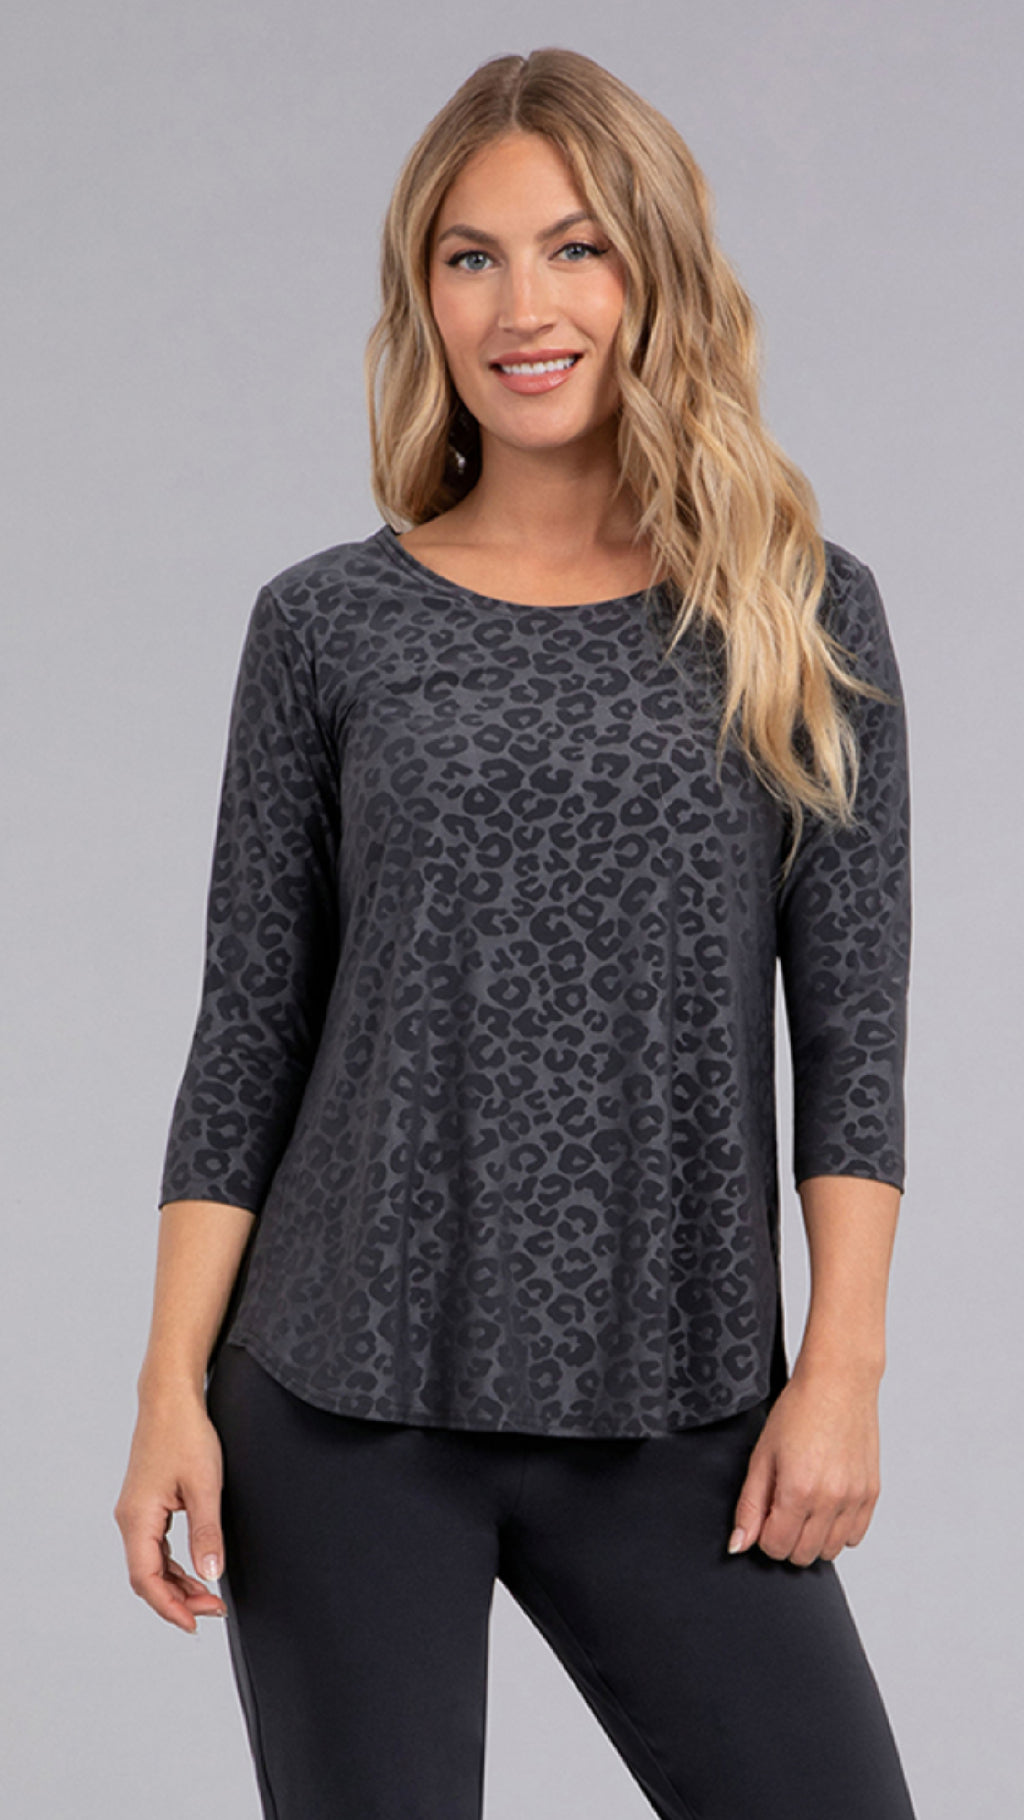 Go to Classic T-Relax, 3/4 Sleeve-Animal Embossed